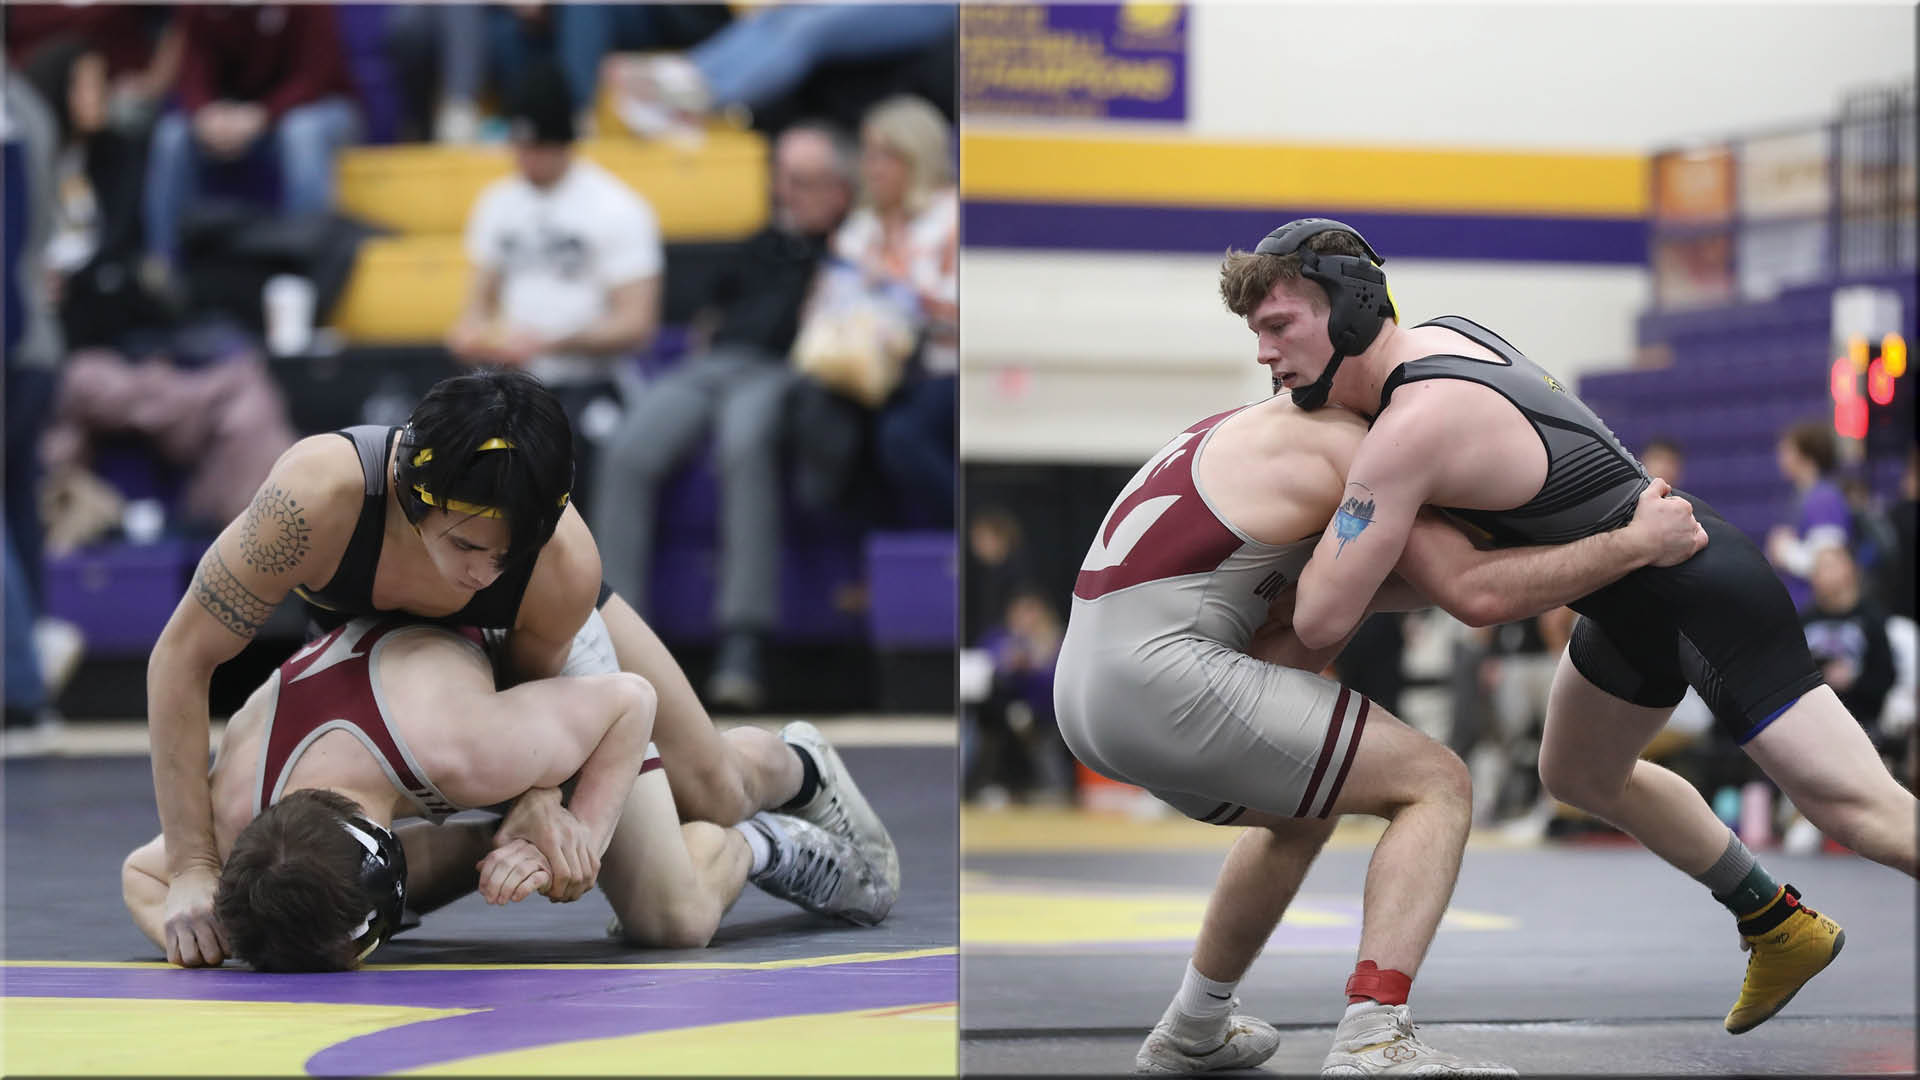 Valdez (Left) and Yineman (Right) compete in early matches at the WIAC Championship 

Photo Credit: Steve Frommell